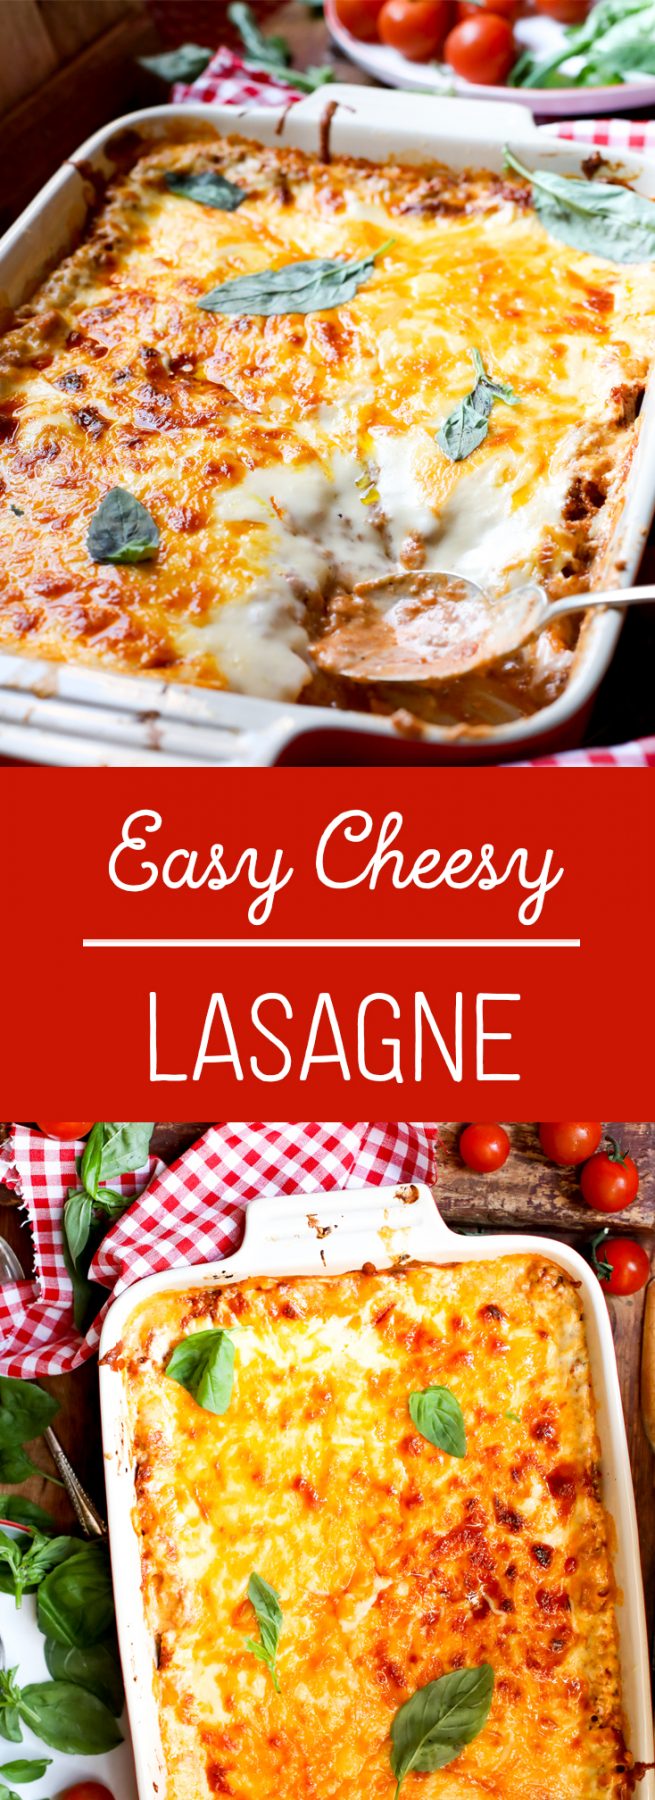 Easy Lasagne Recipe with Lots of Cheese Sauce | Quick Lasagne